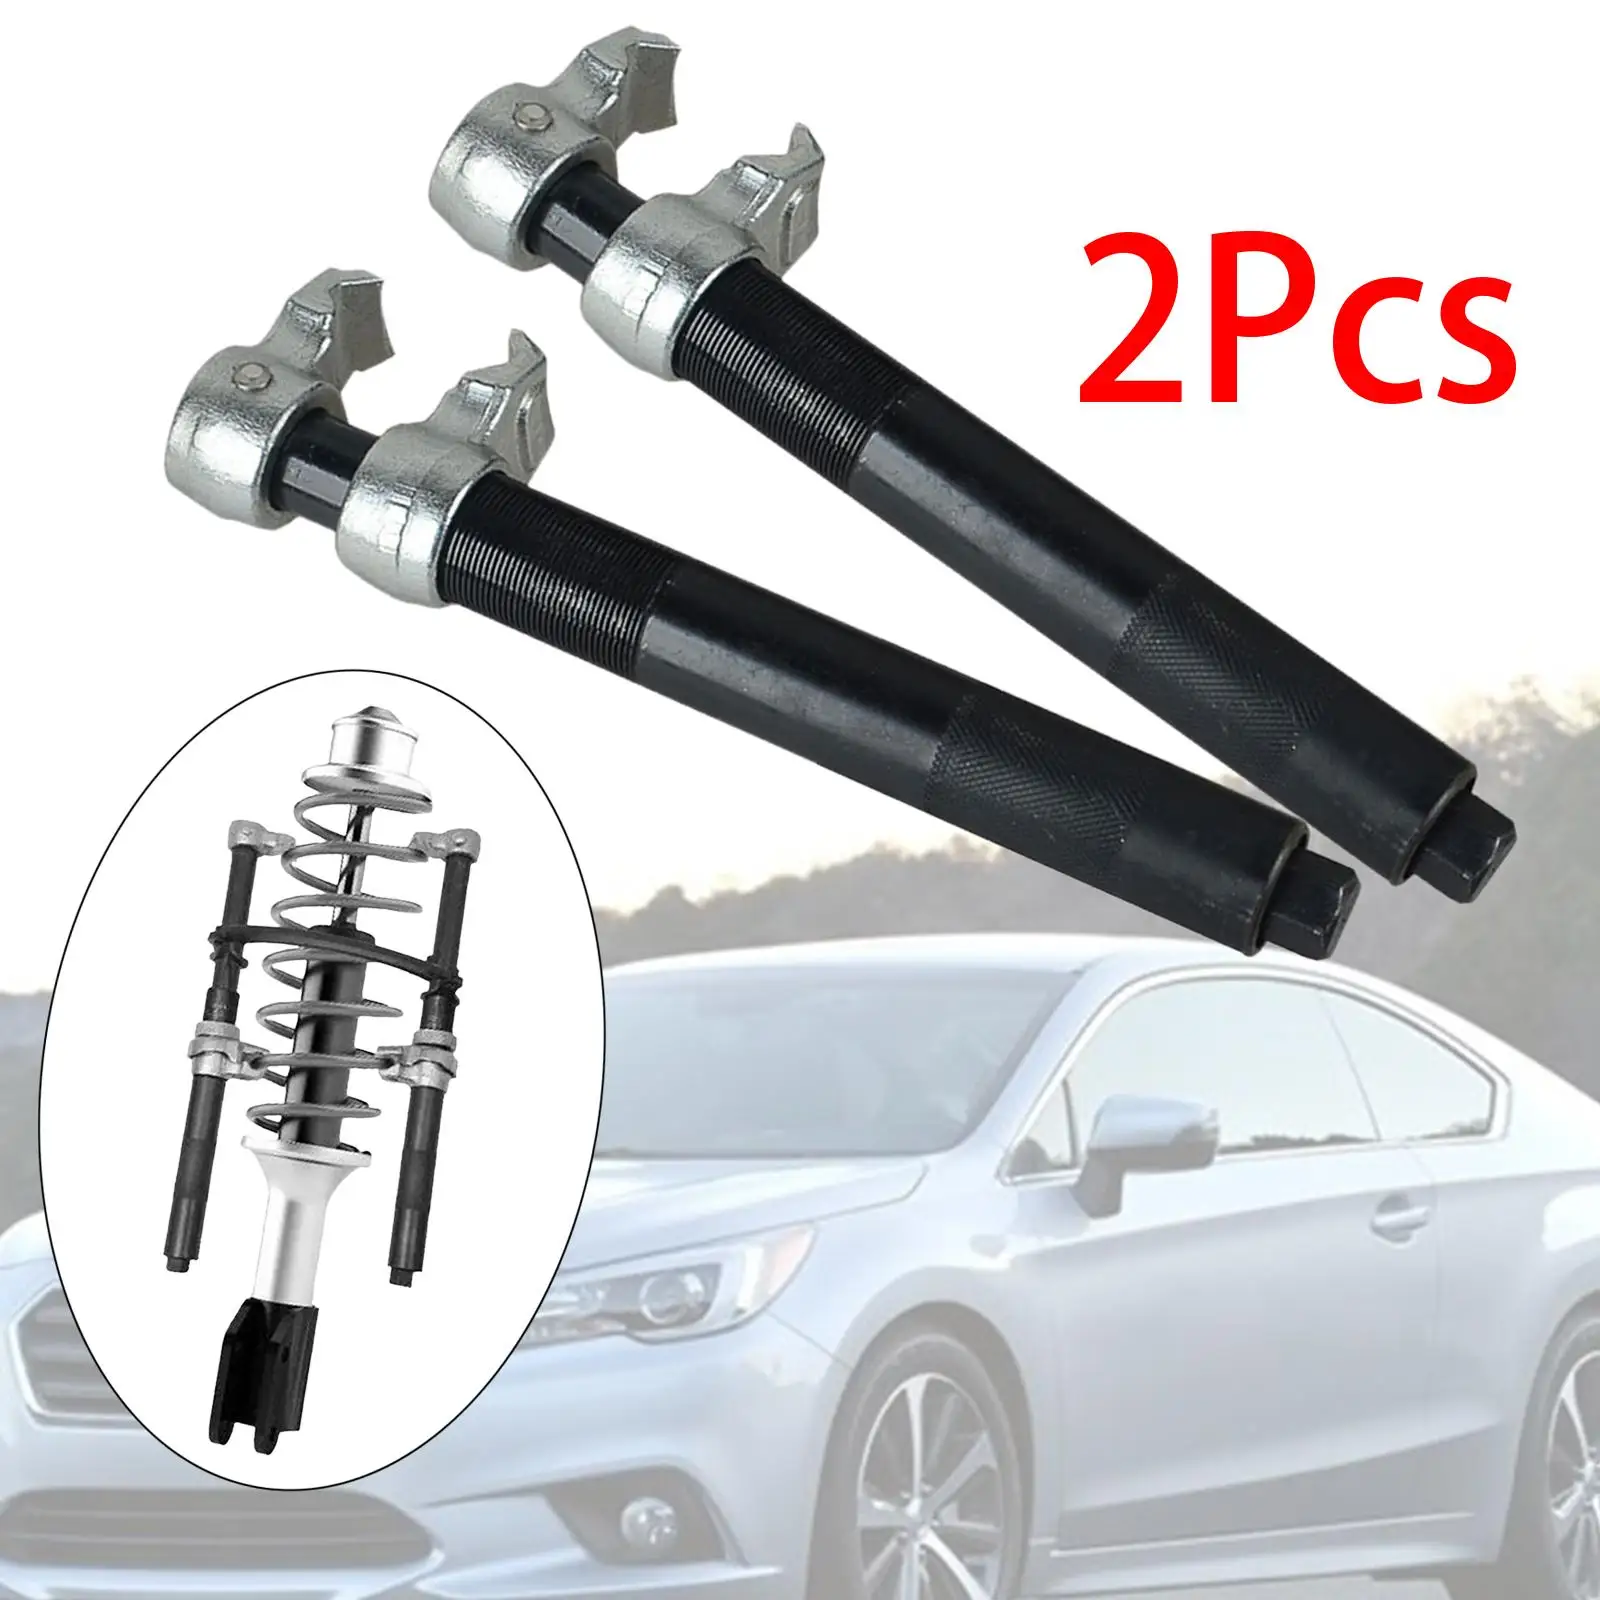 Compressor Adjustable Direct Replaces Spare Parts Spring Struts Shocks with 2 Steel Jaw Claws Spring Spacer